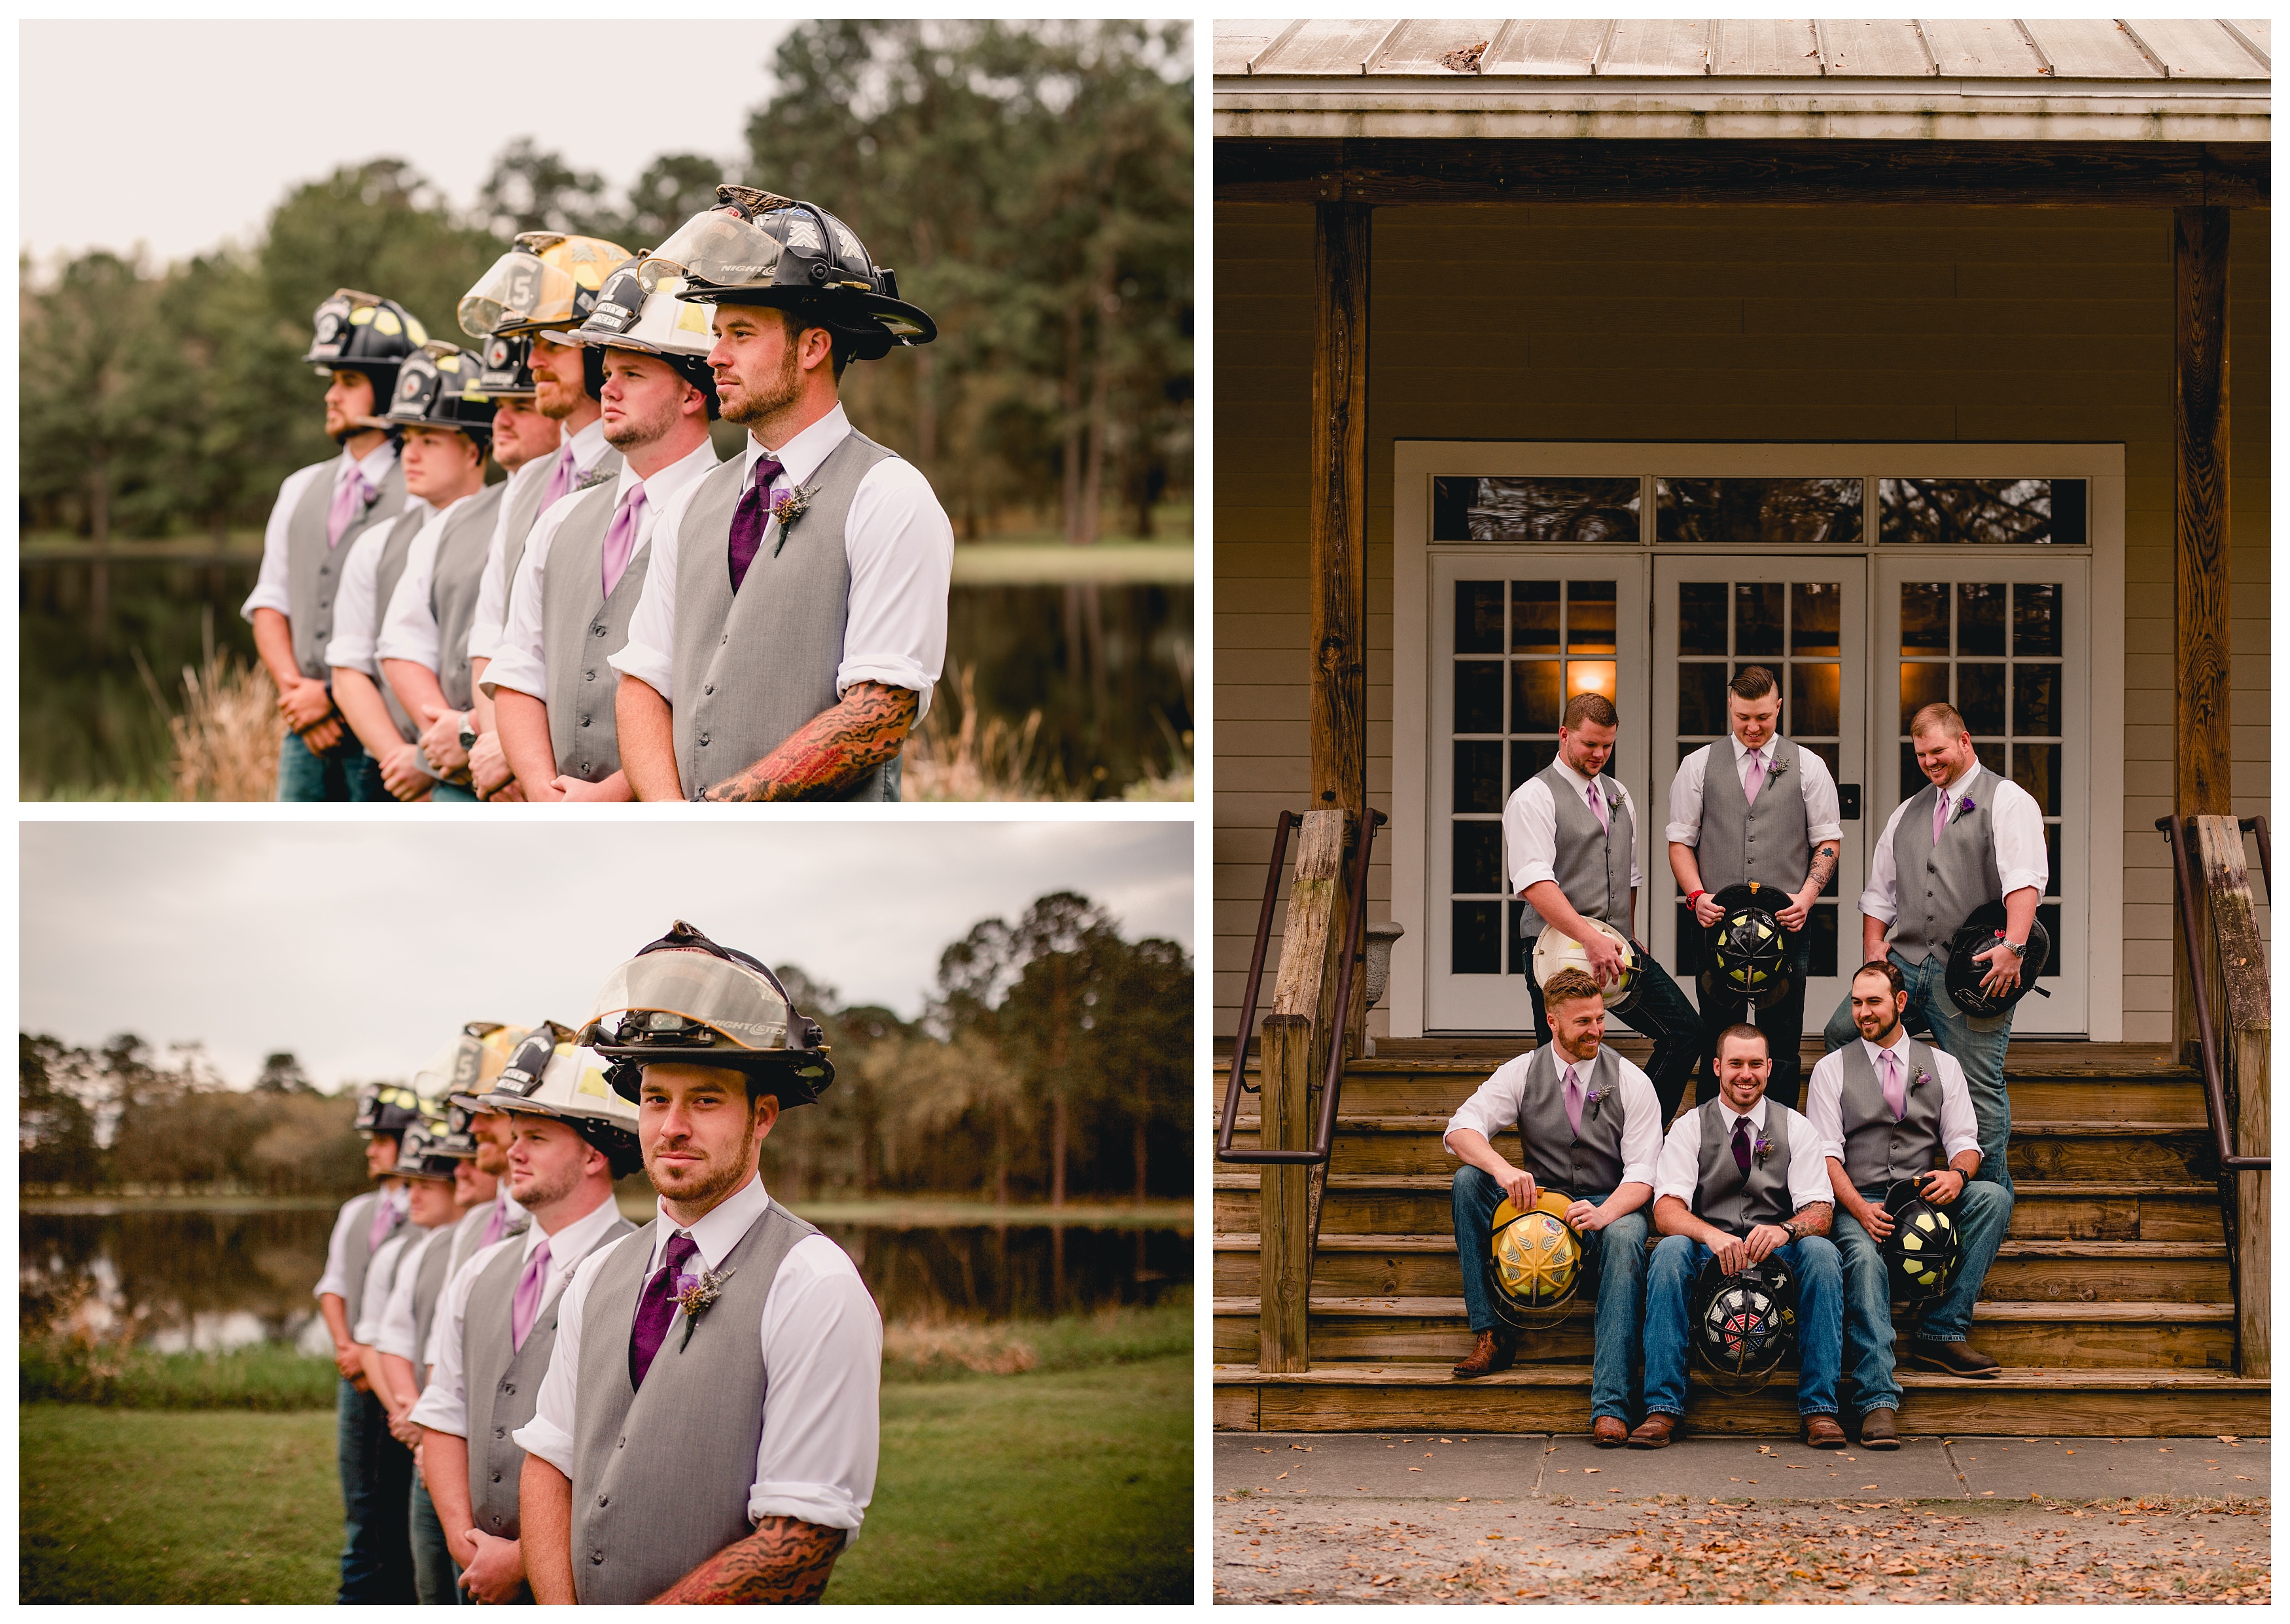 Groom, who is a fireman, with his fire buddies wear their firehats for photos. Fireman wedding pictures. Shelly Williams Photography